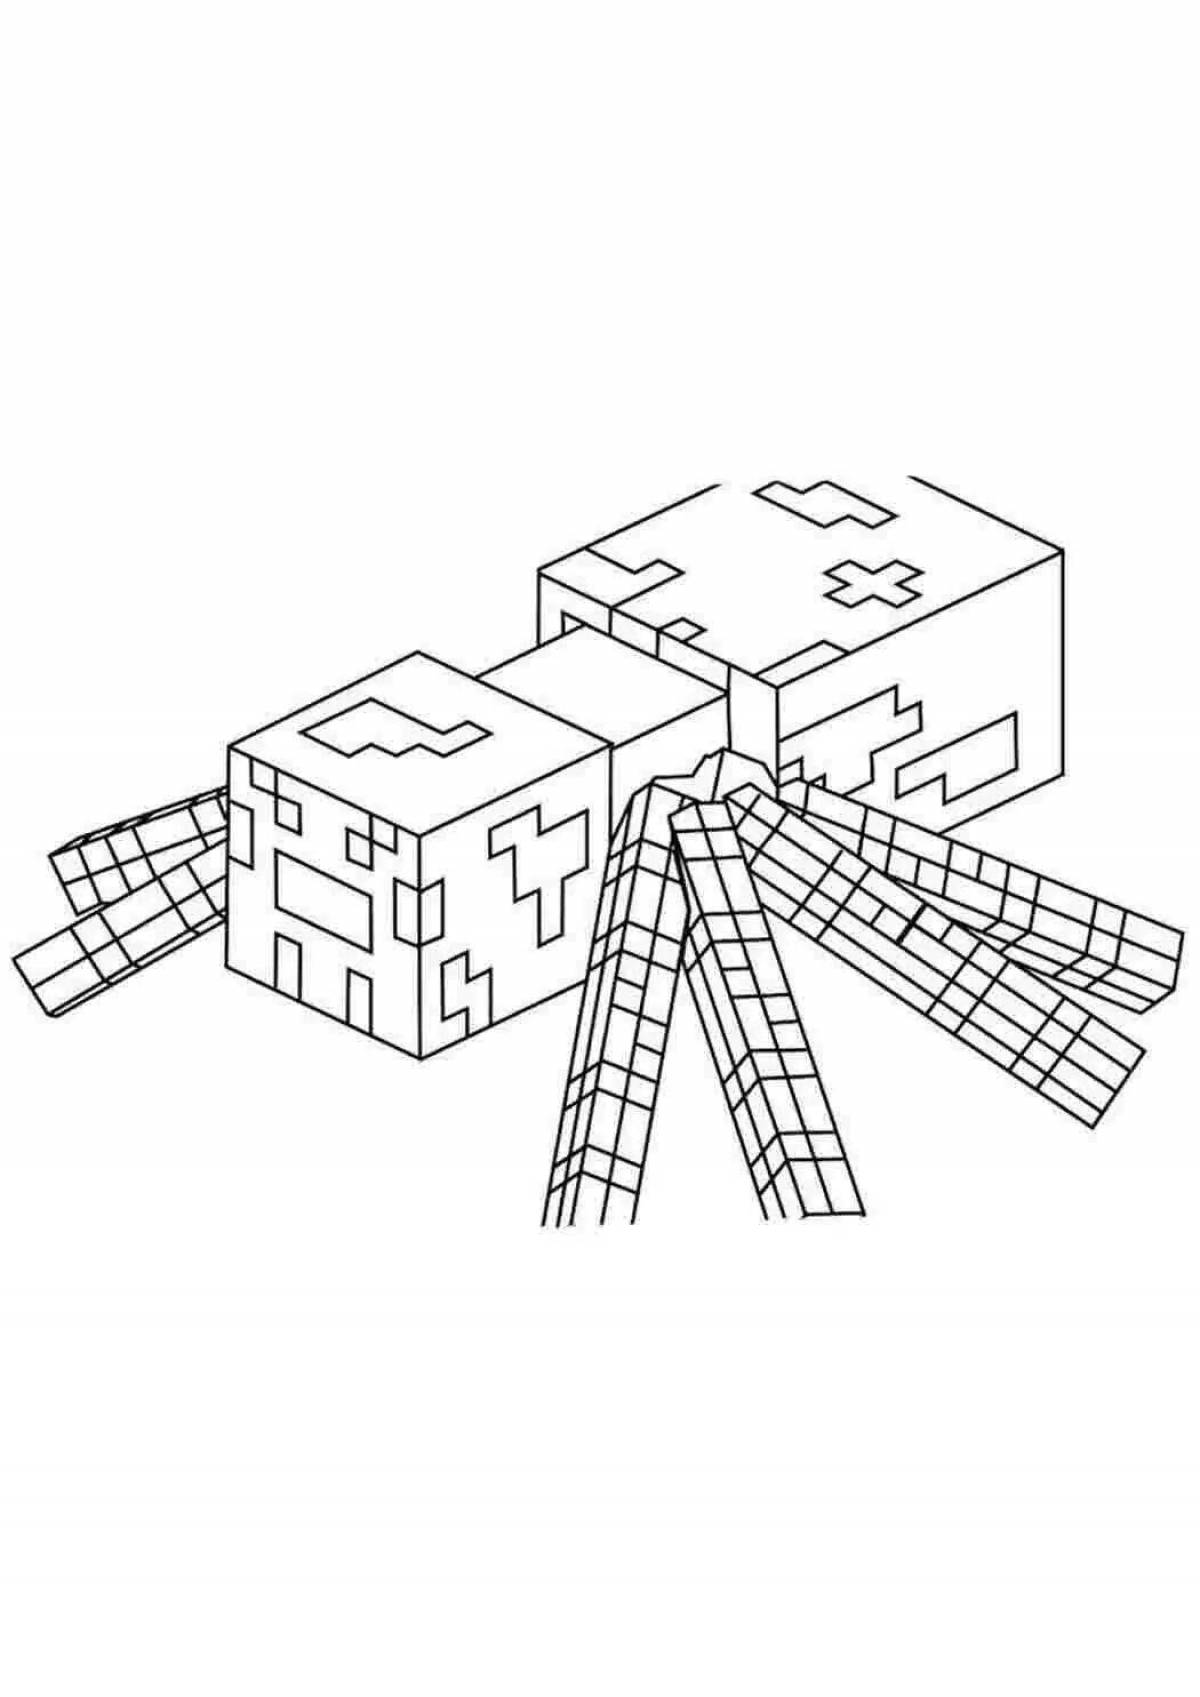 Shine minecraft house coloring book